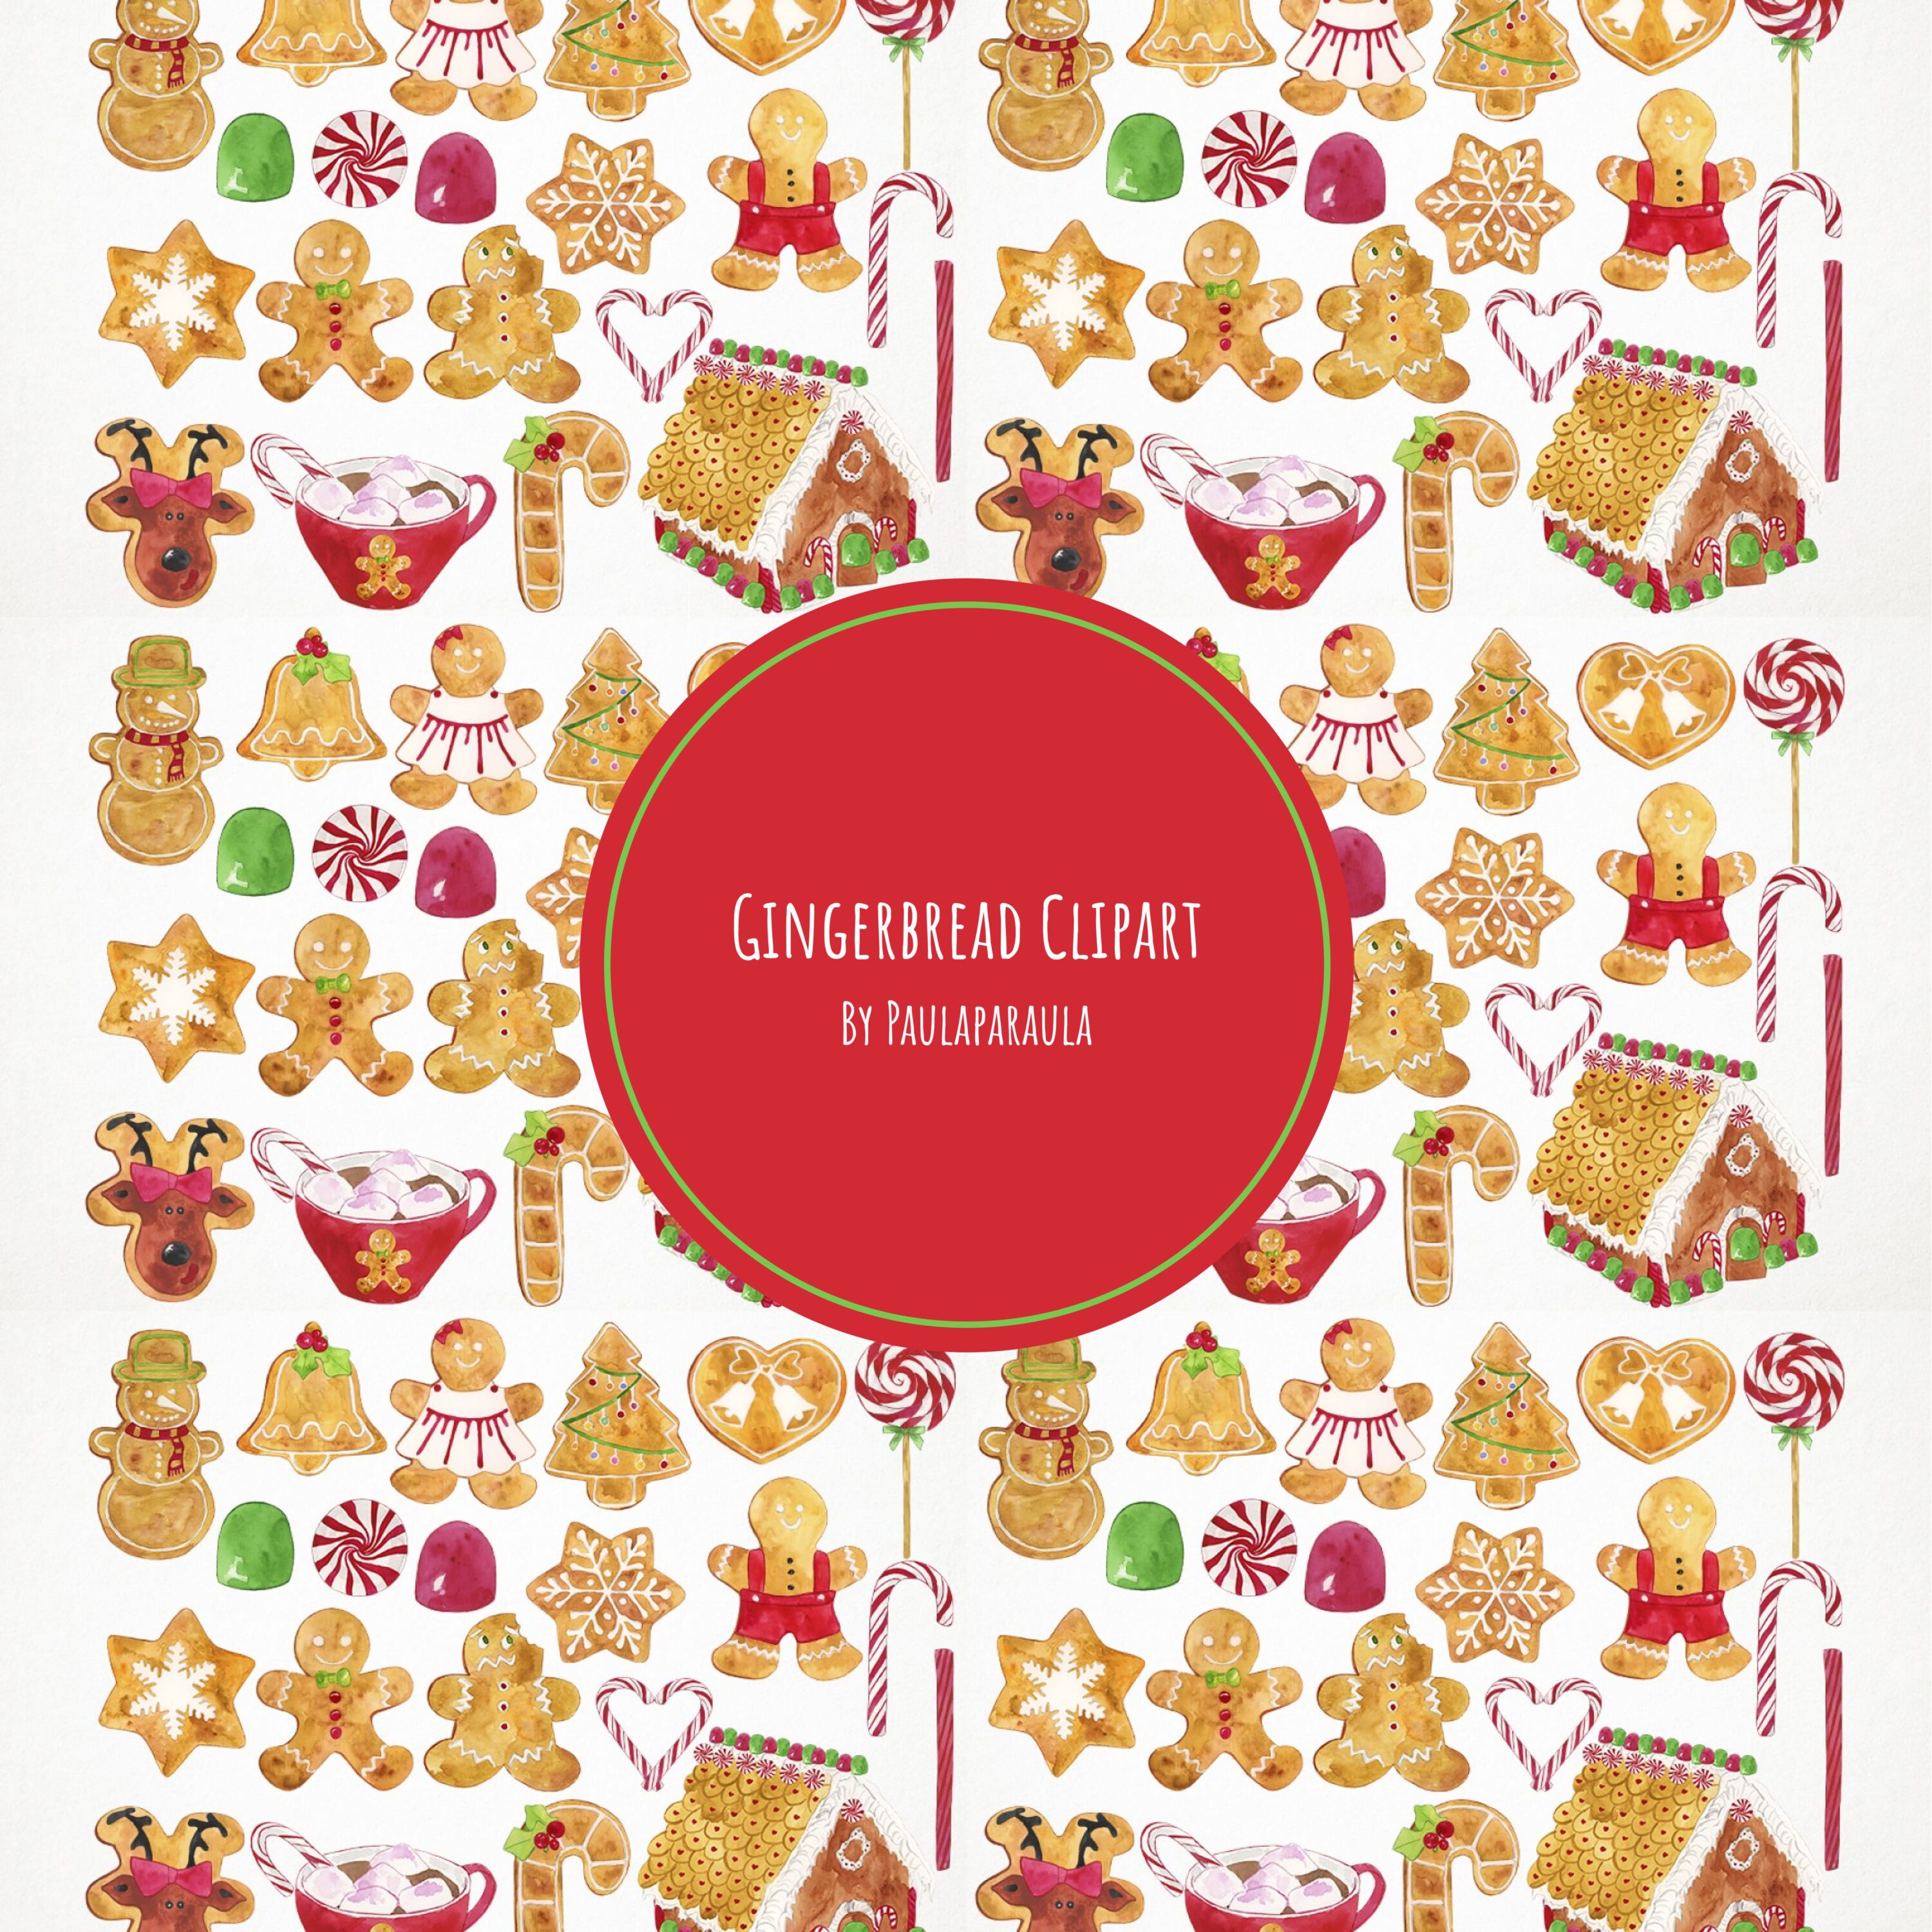 Gingerbread Clipart cover.